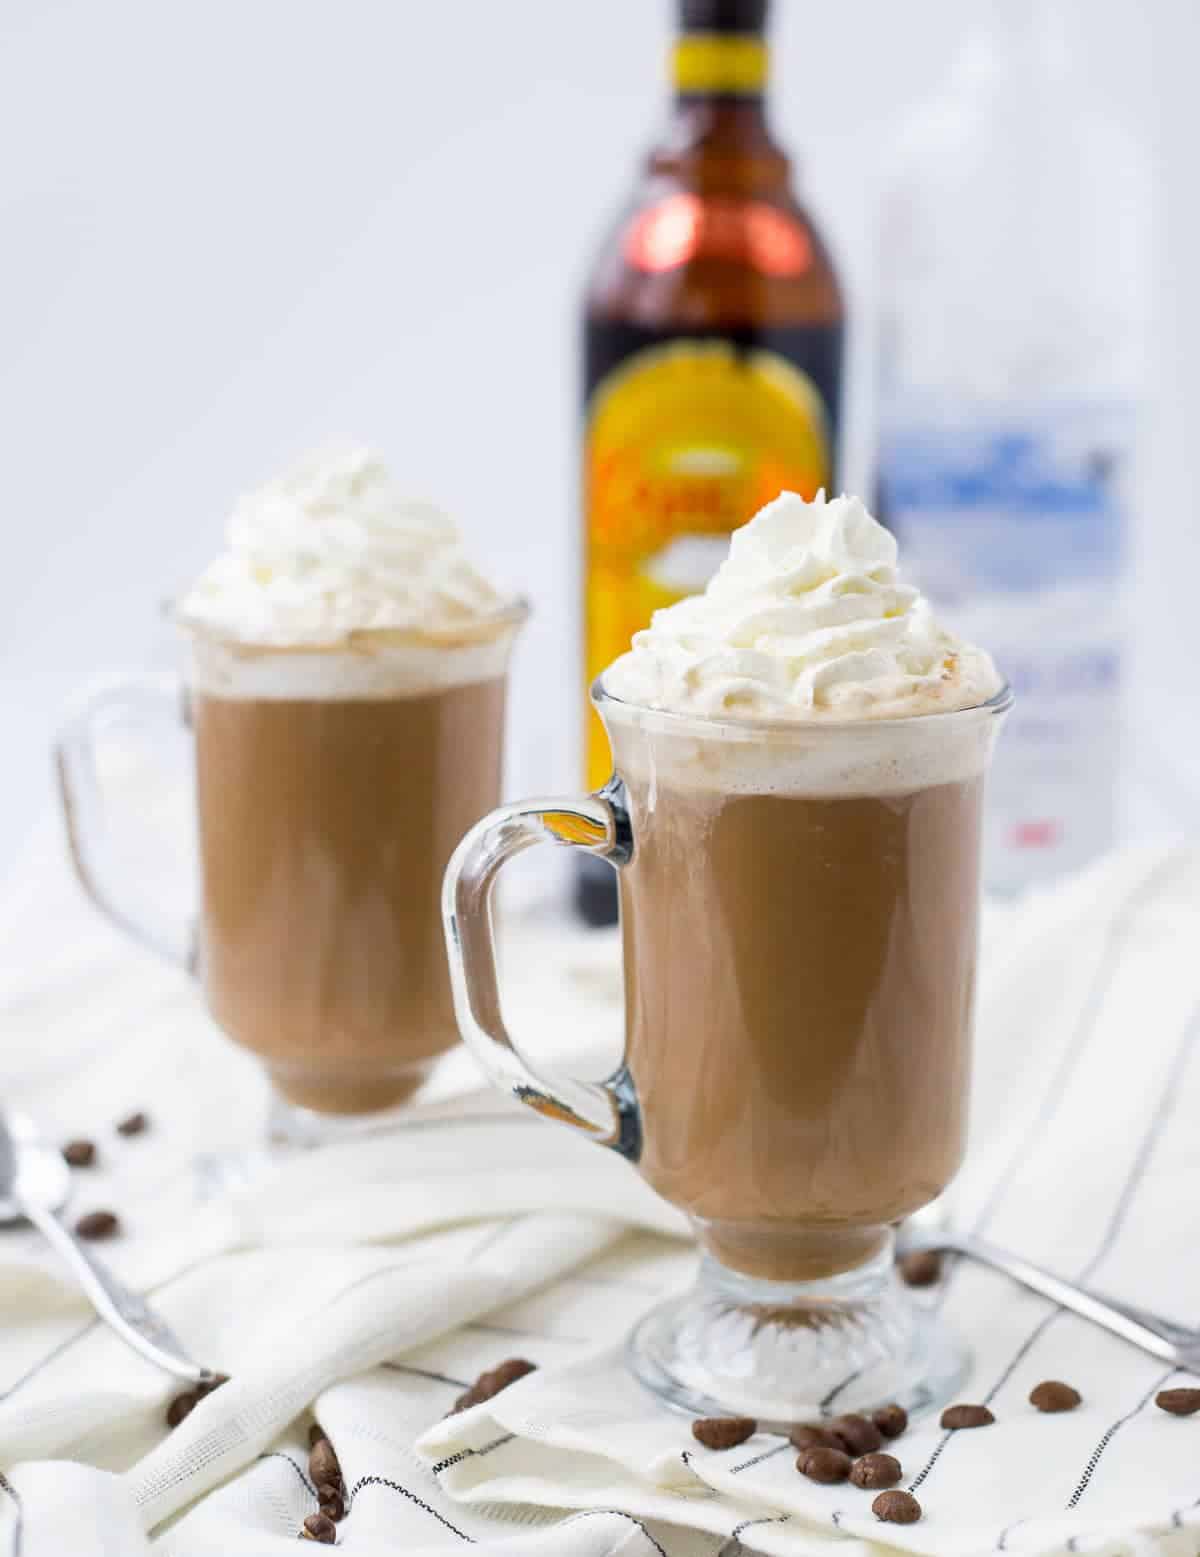 Footed clear glass mugs containing hot chocolate garnished with whipped cream, on white striped cloth, with bottle of Kahlua in background.